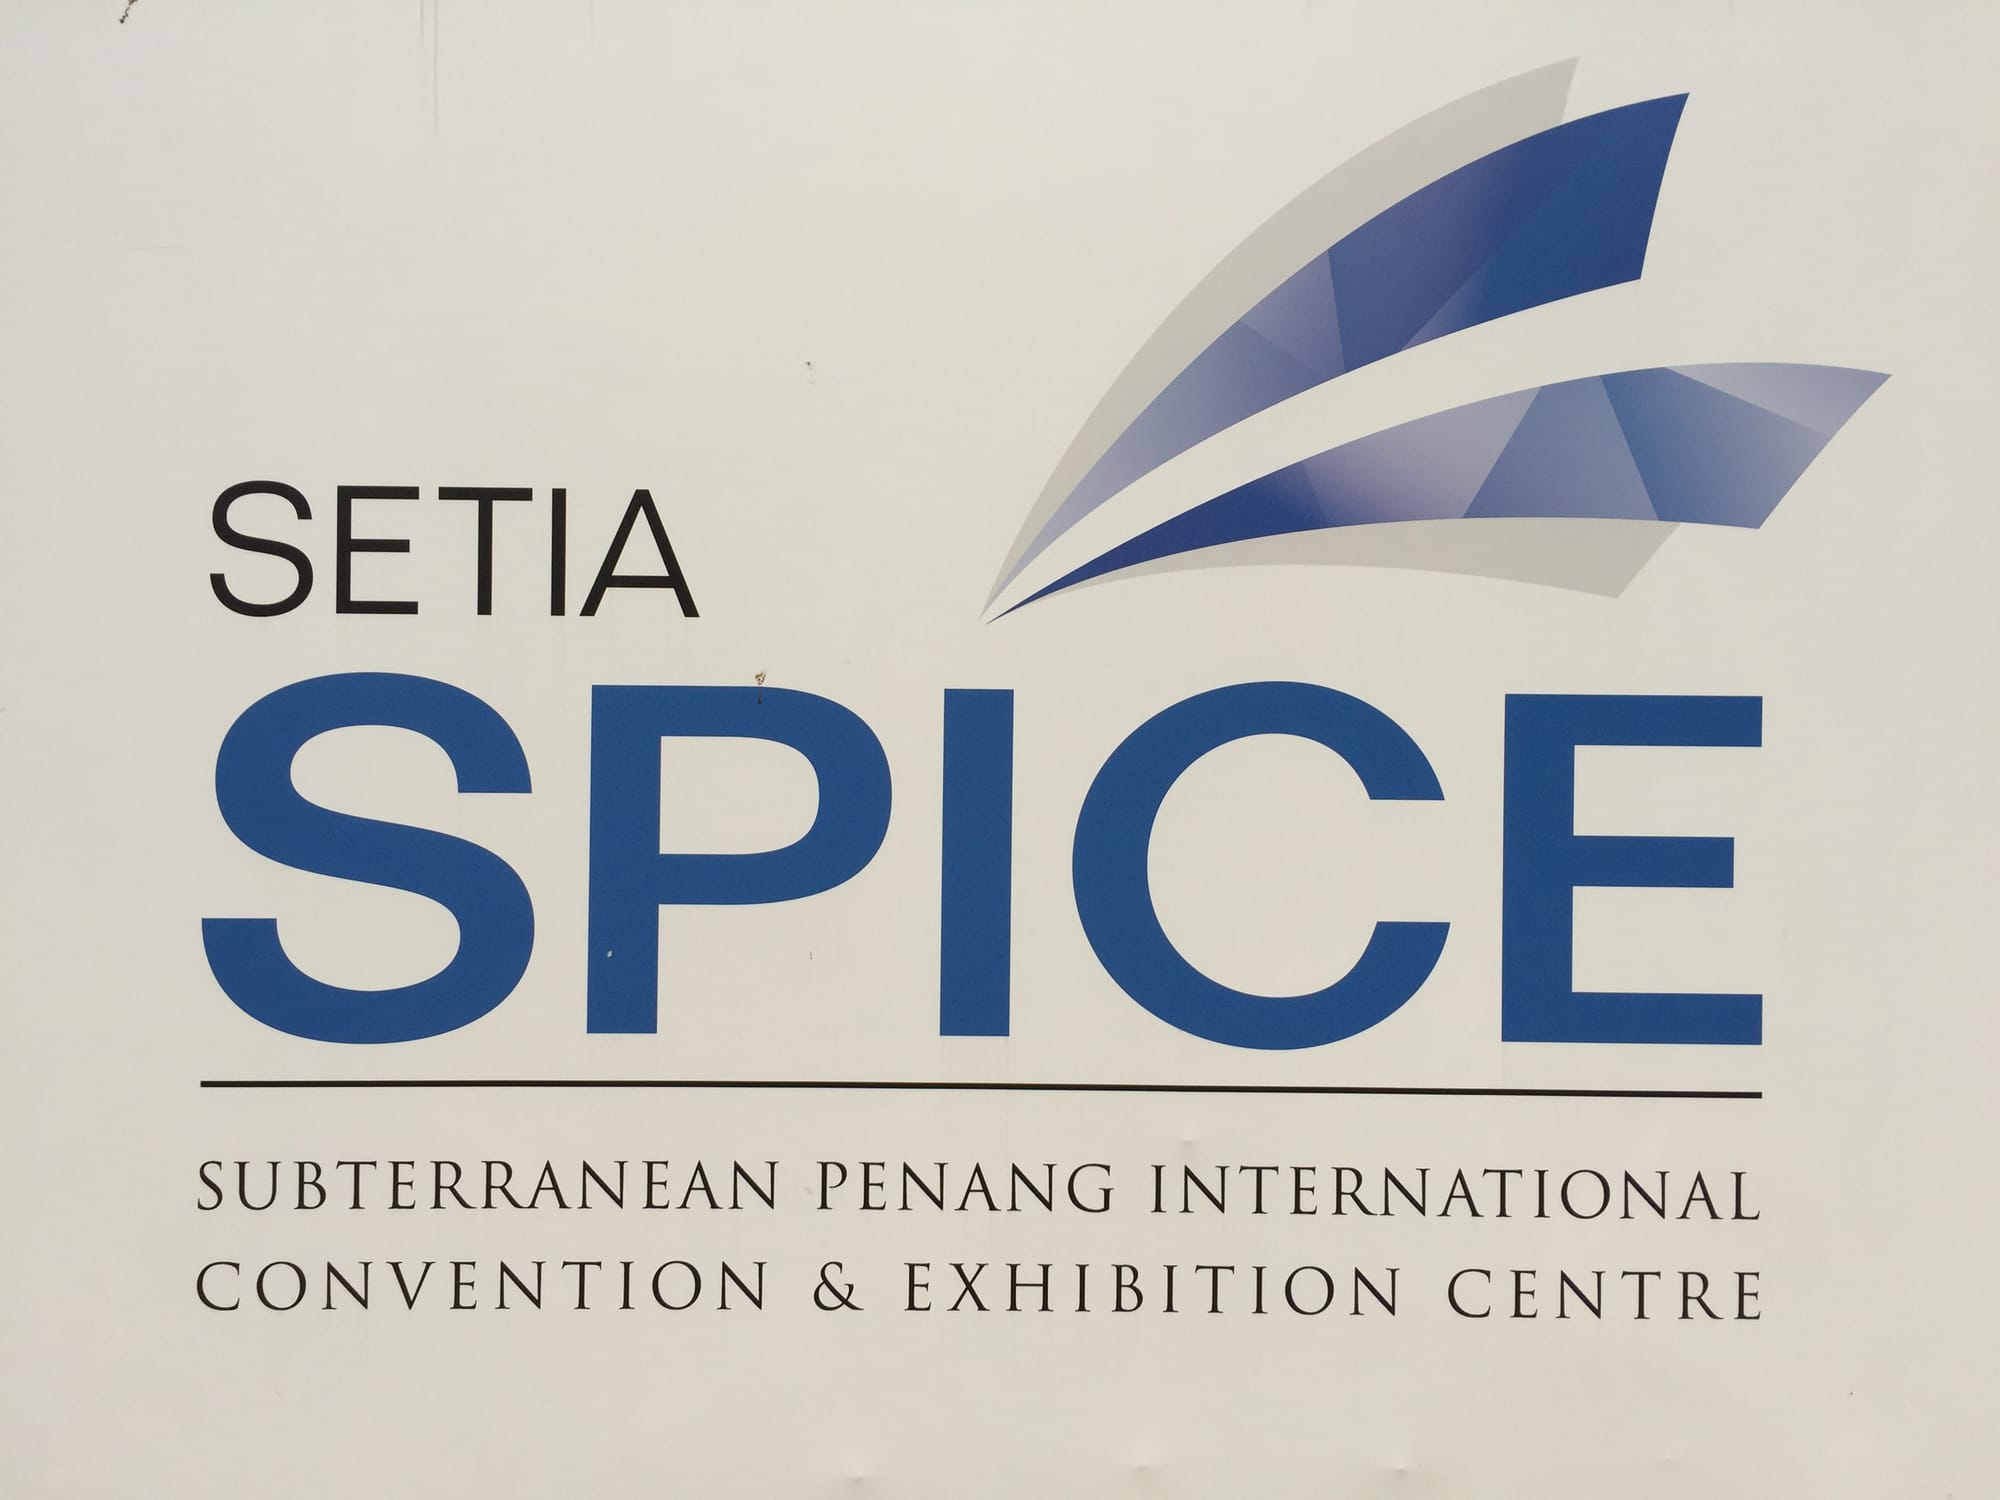 Photo by Author — Subterranean Penang International Convention & Exhibition Centre (SPICE)